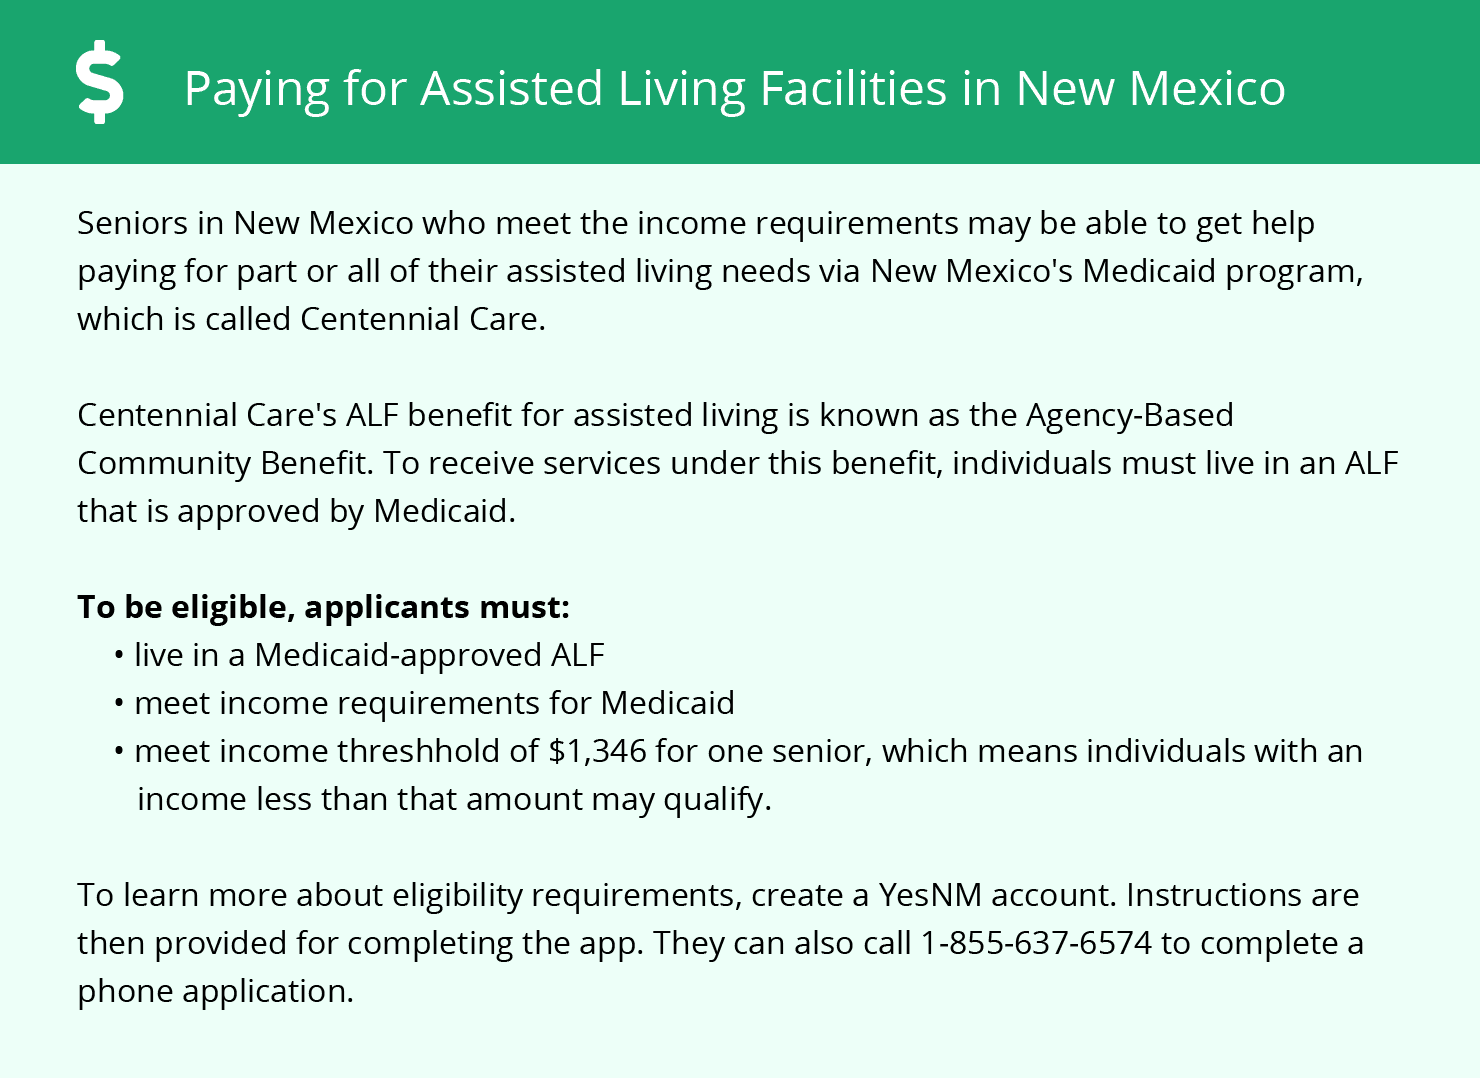 Financial Assistance for Assisted Living in New Mexico